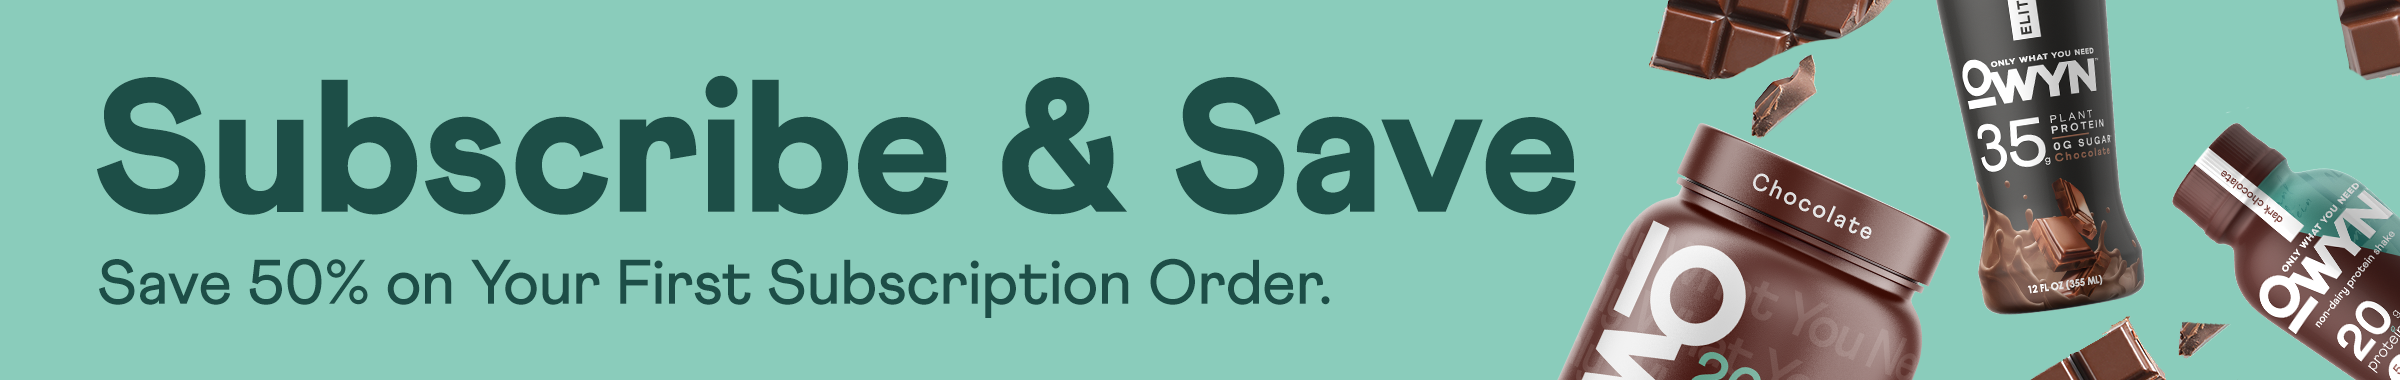 Subscribe & Save 50% on First Subscription Order.